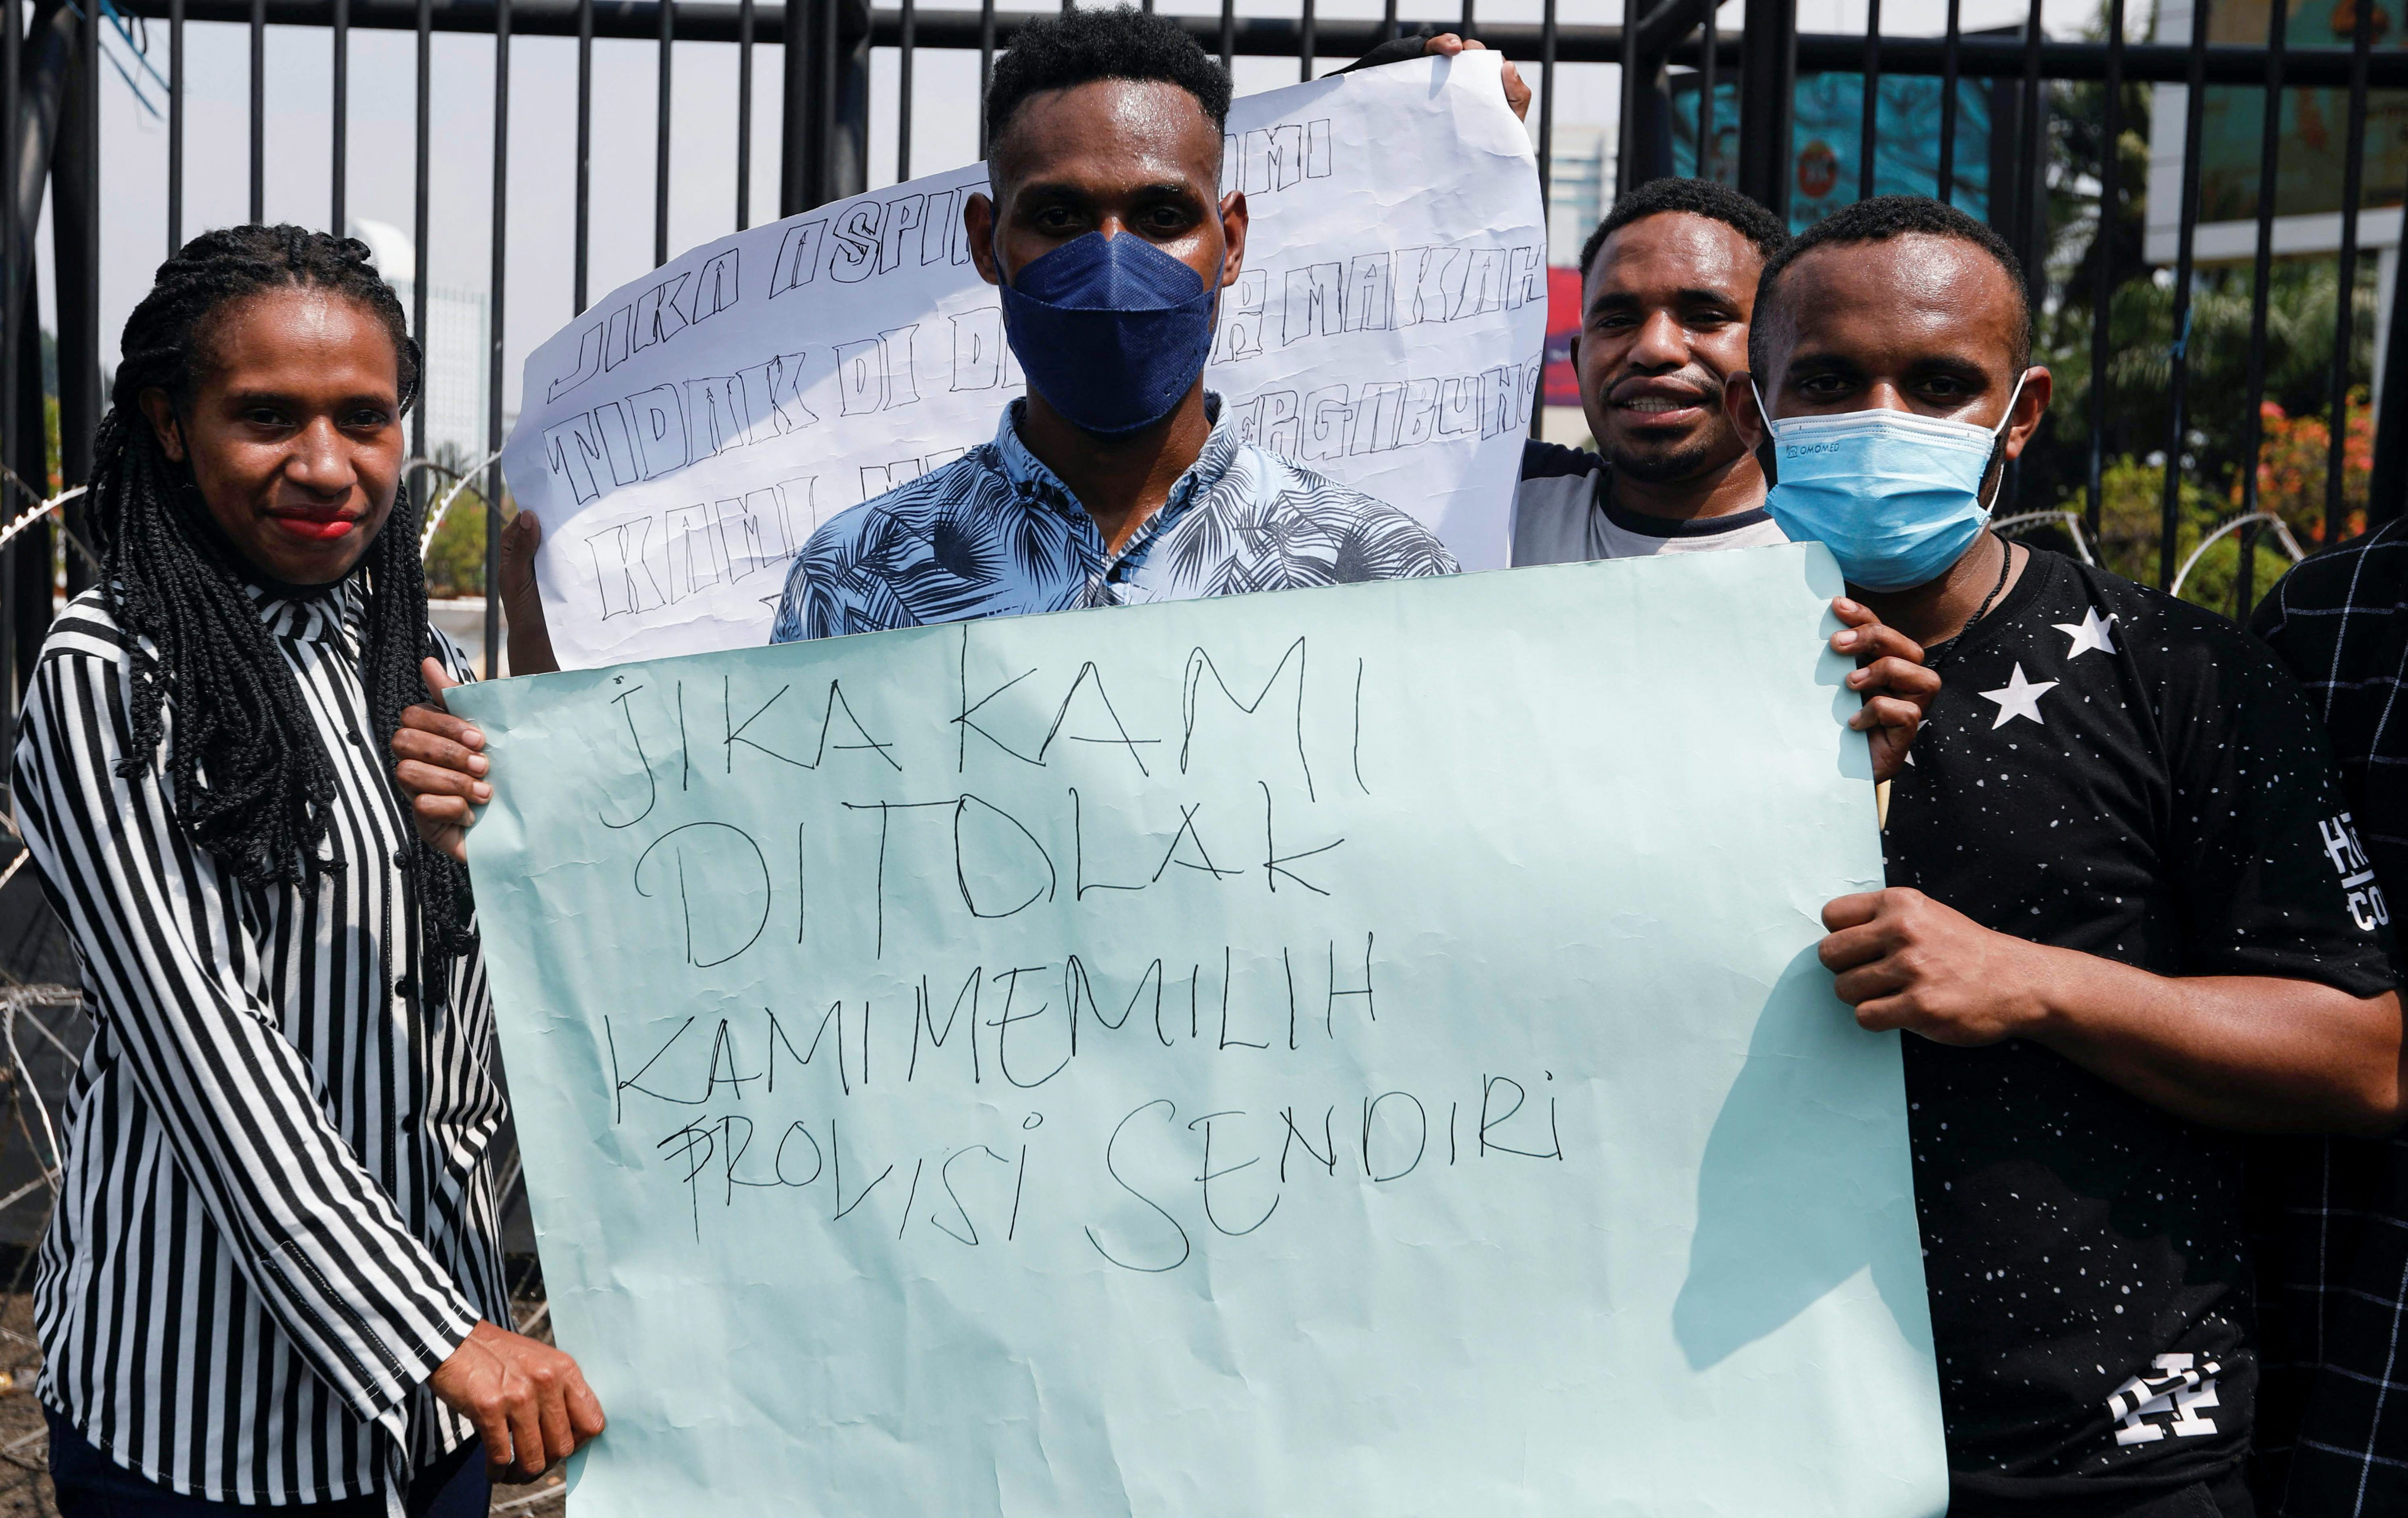 Demonstrators hold a sign as they protest outside the Indonesian Parliament following a bill passed by legislators to create three new provinces in its underdeveloped region of Papua, in Jakarta